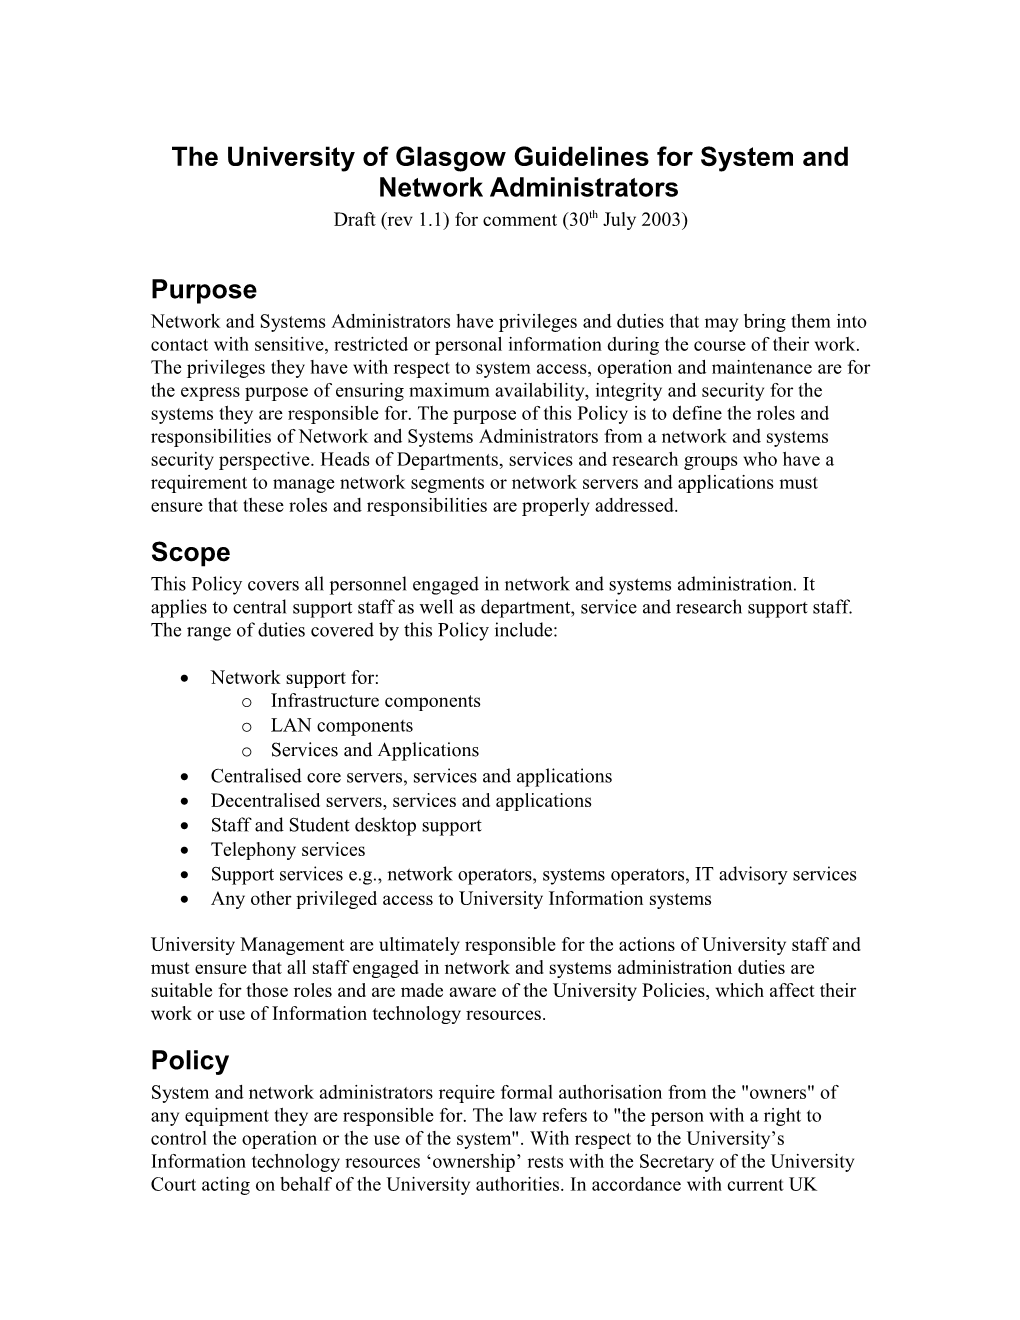 University of Glasgow Incident Handling Policy